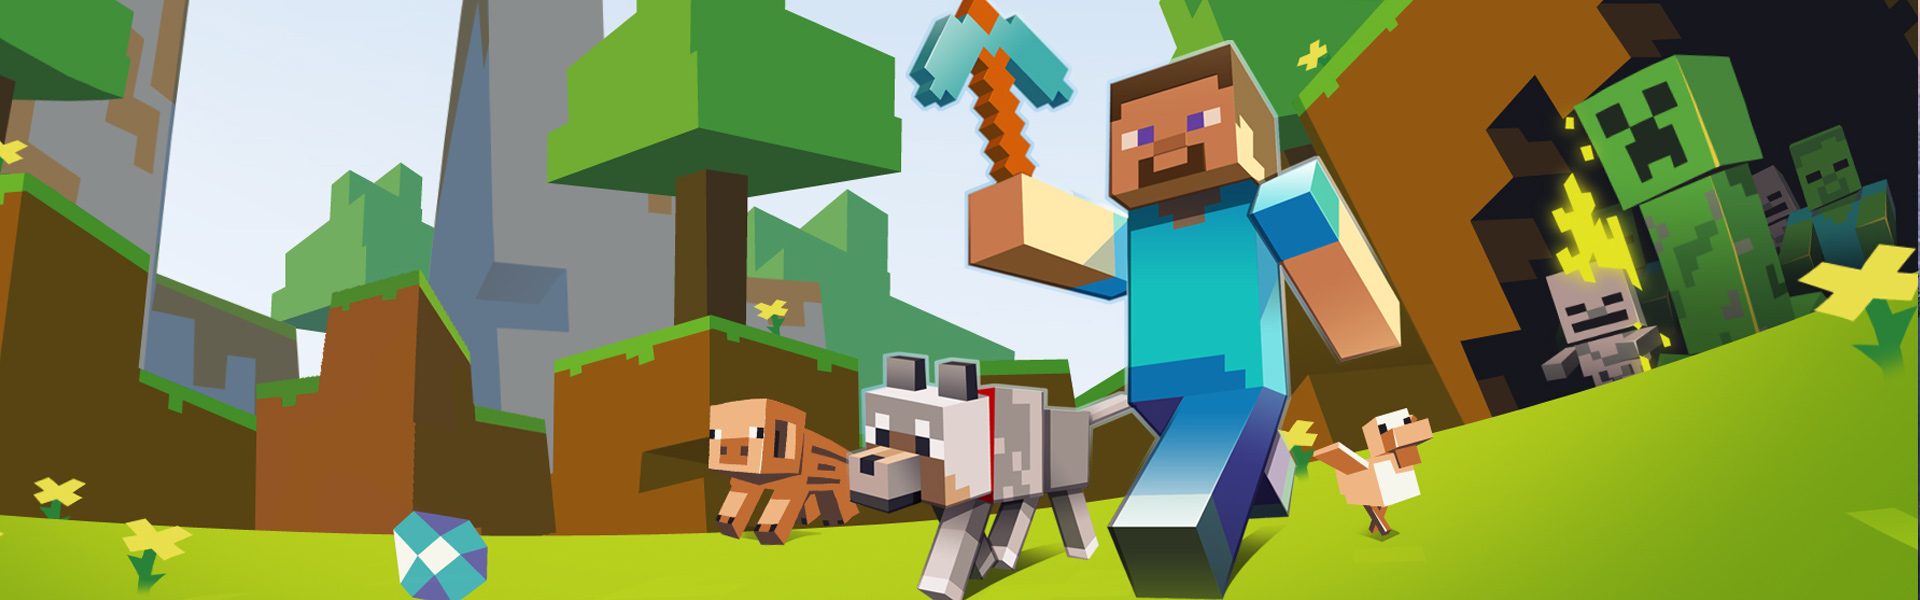 playstation store ps3 minecraft